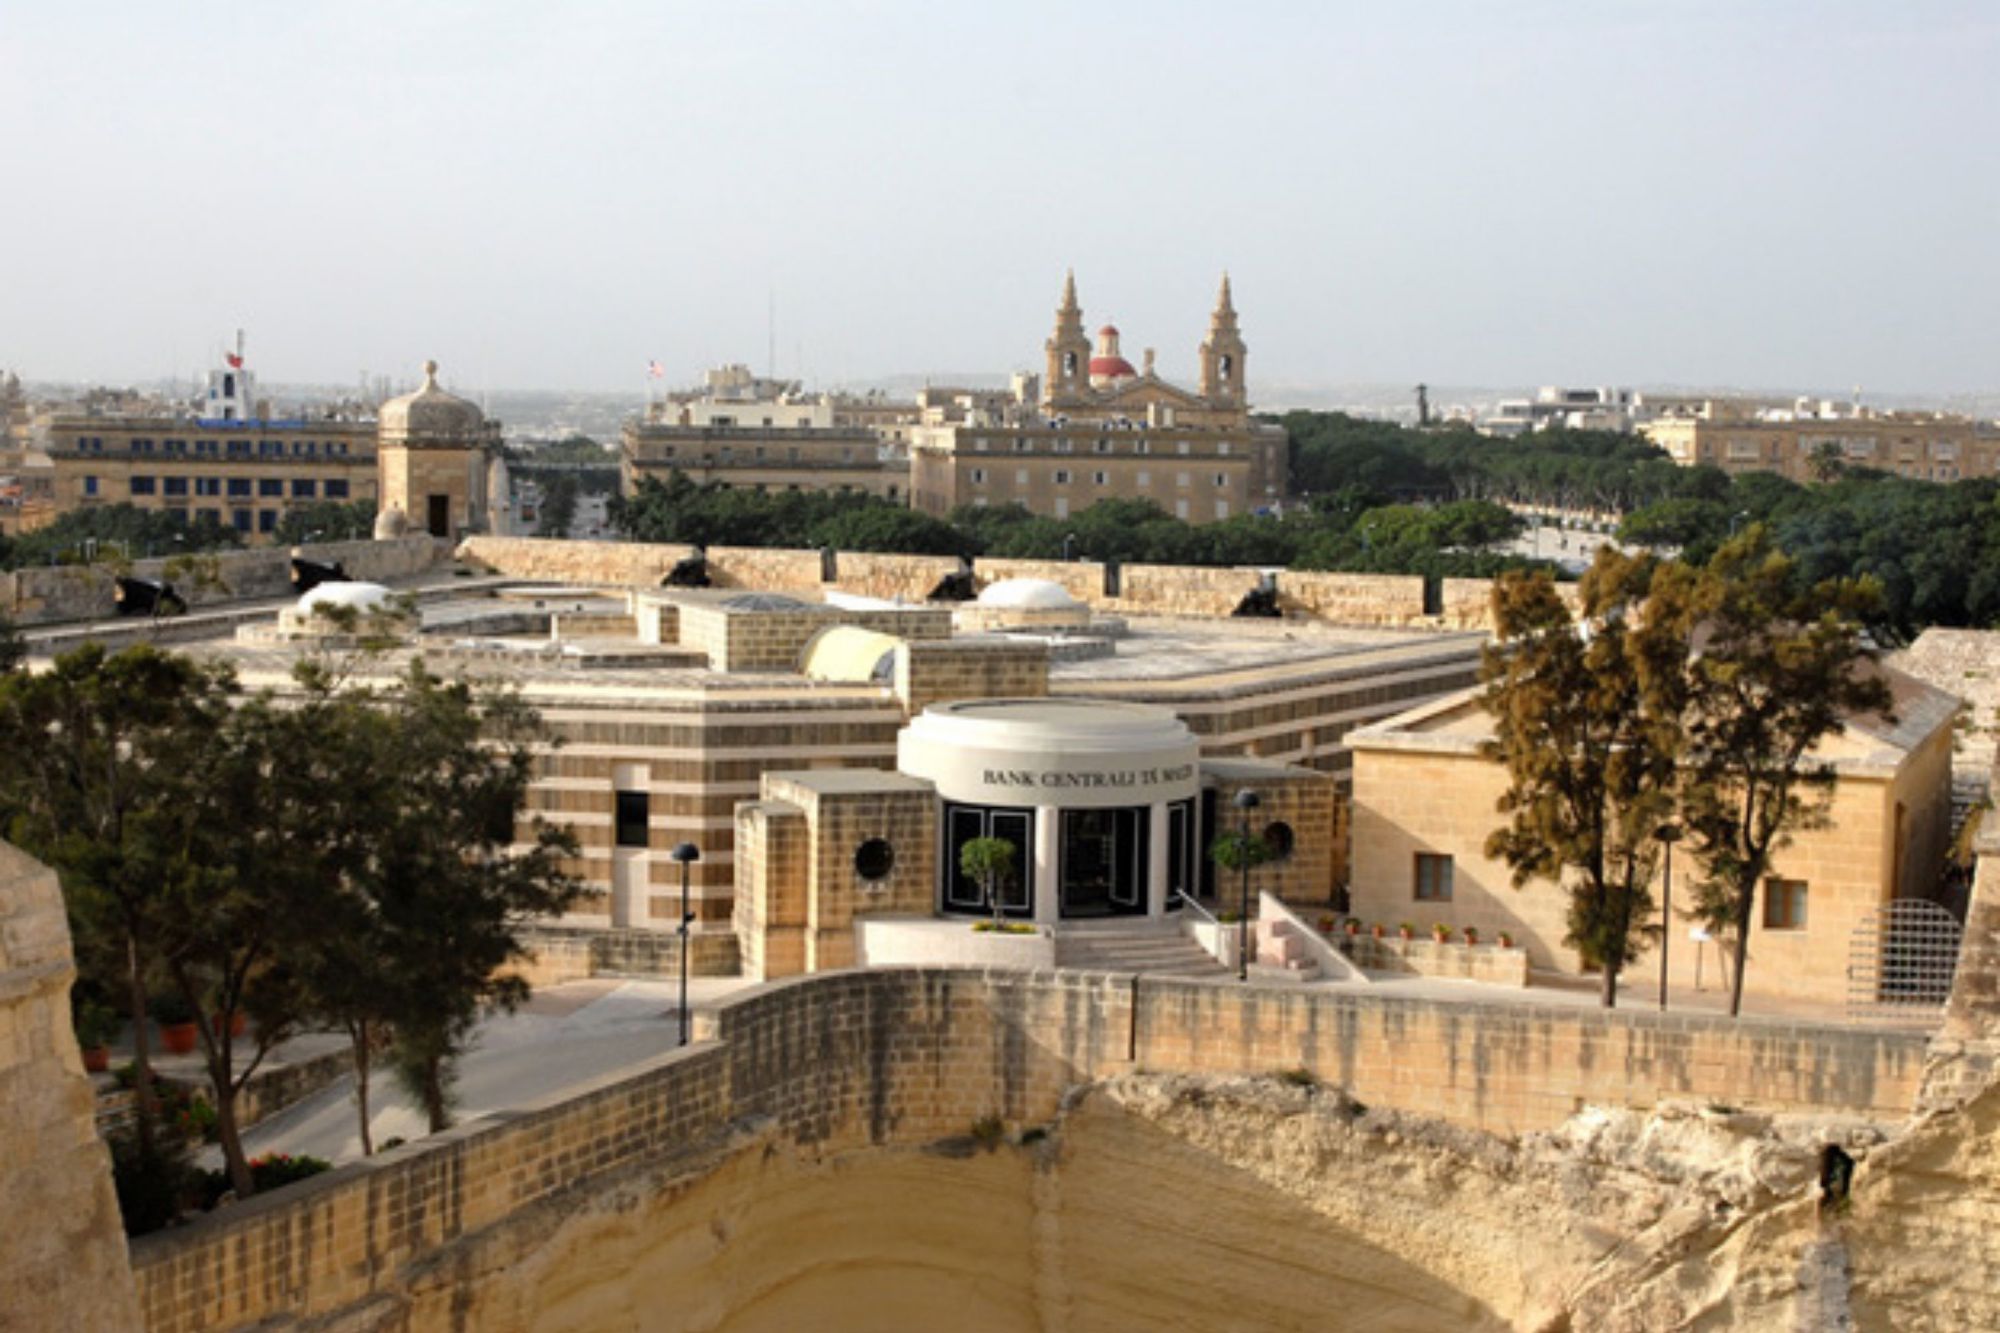 Air Conditioners at the Central Bank of Malta were installed by Midea